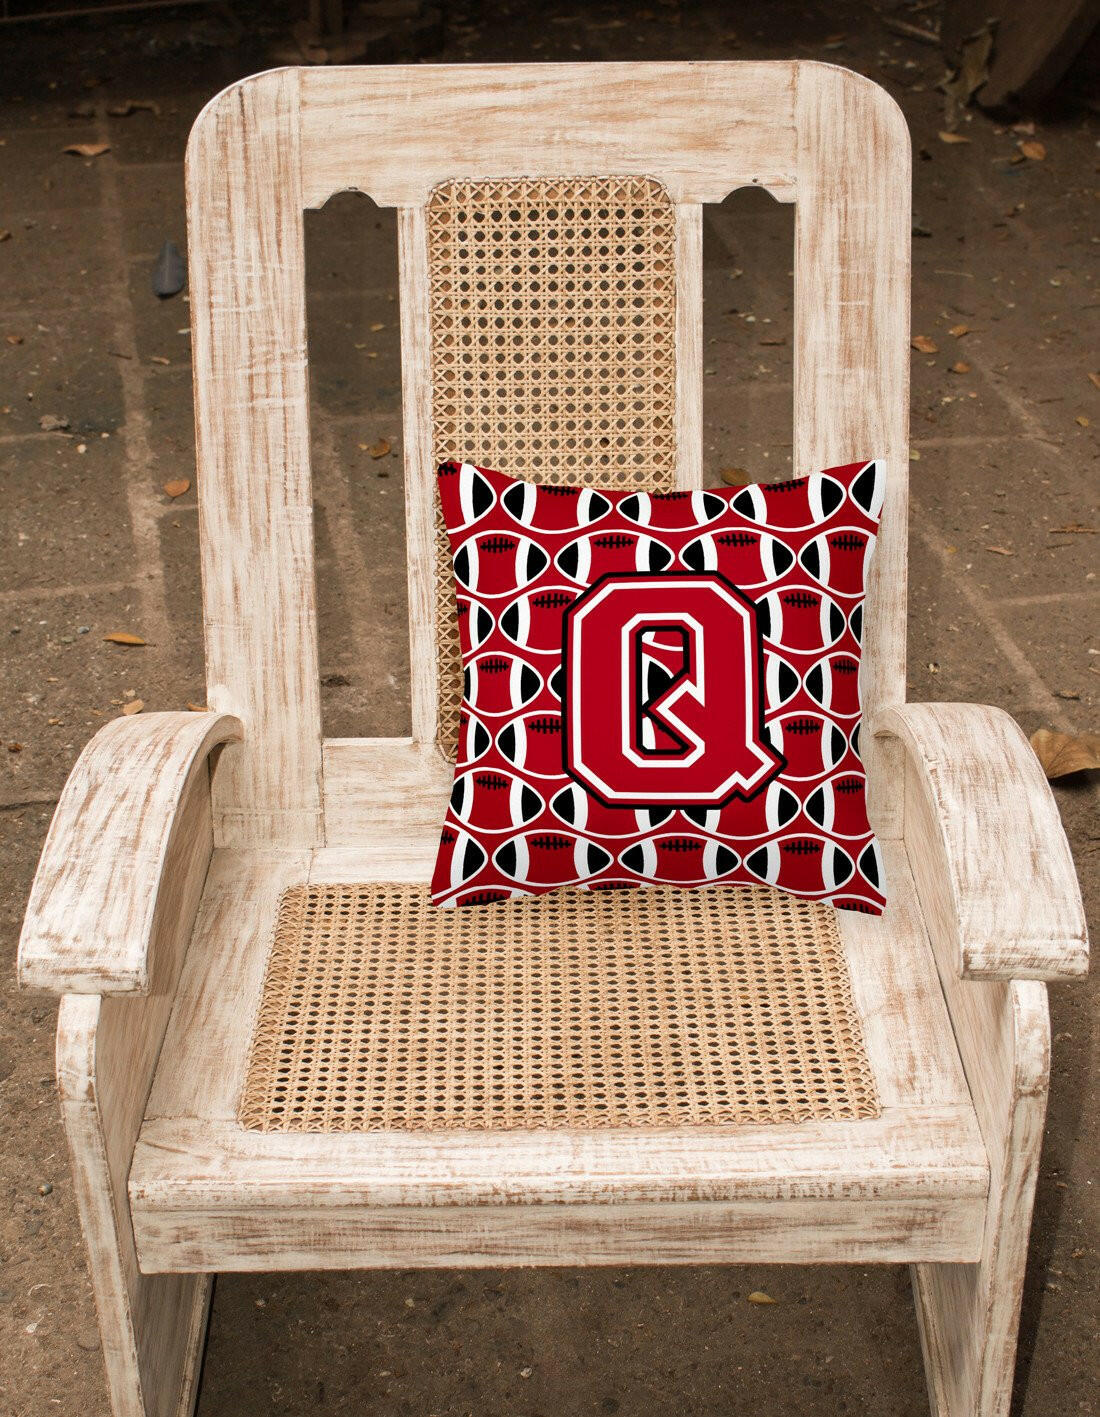 Letter Q Football Red, Black and White Fabric Decorative Pillow CJ1073-QPW1414 by Caroline's Treasures